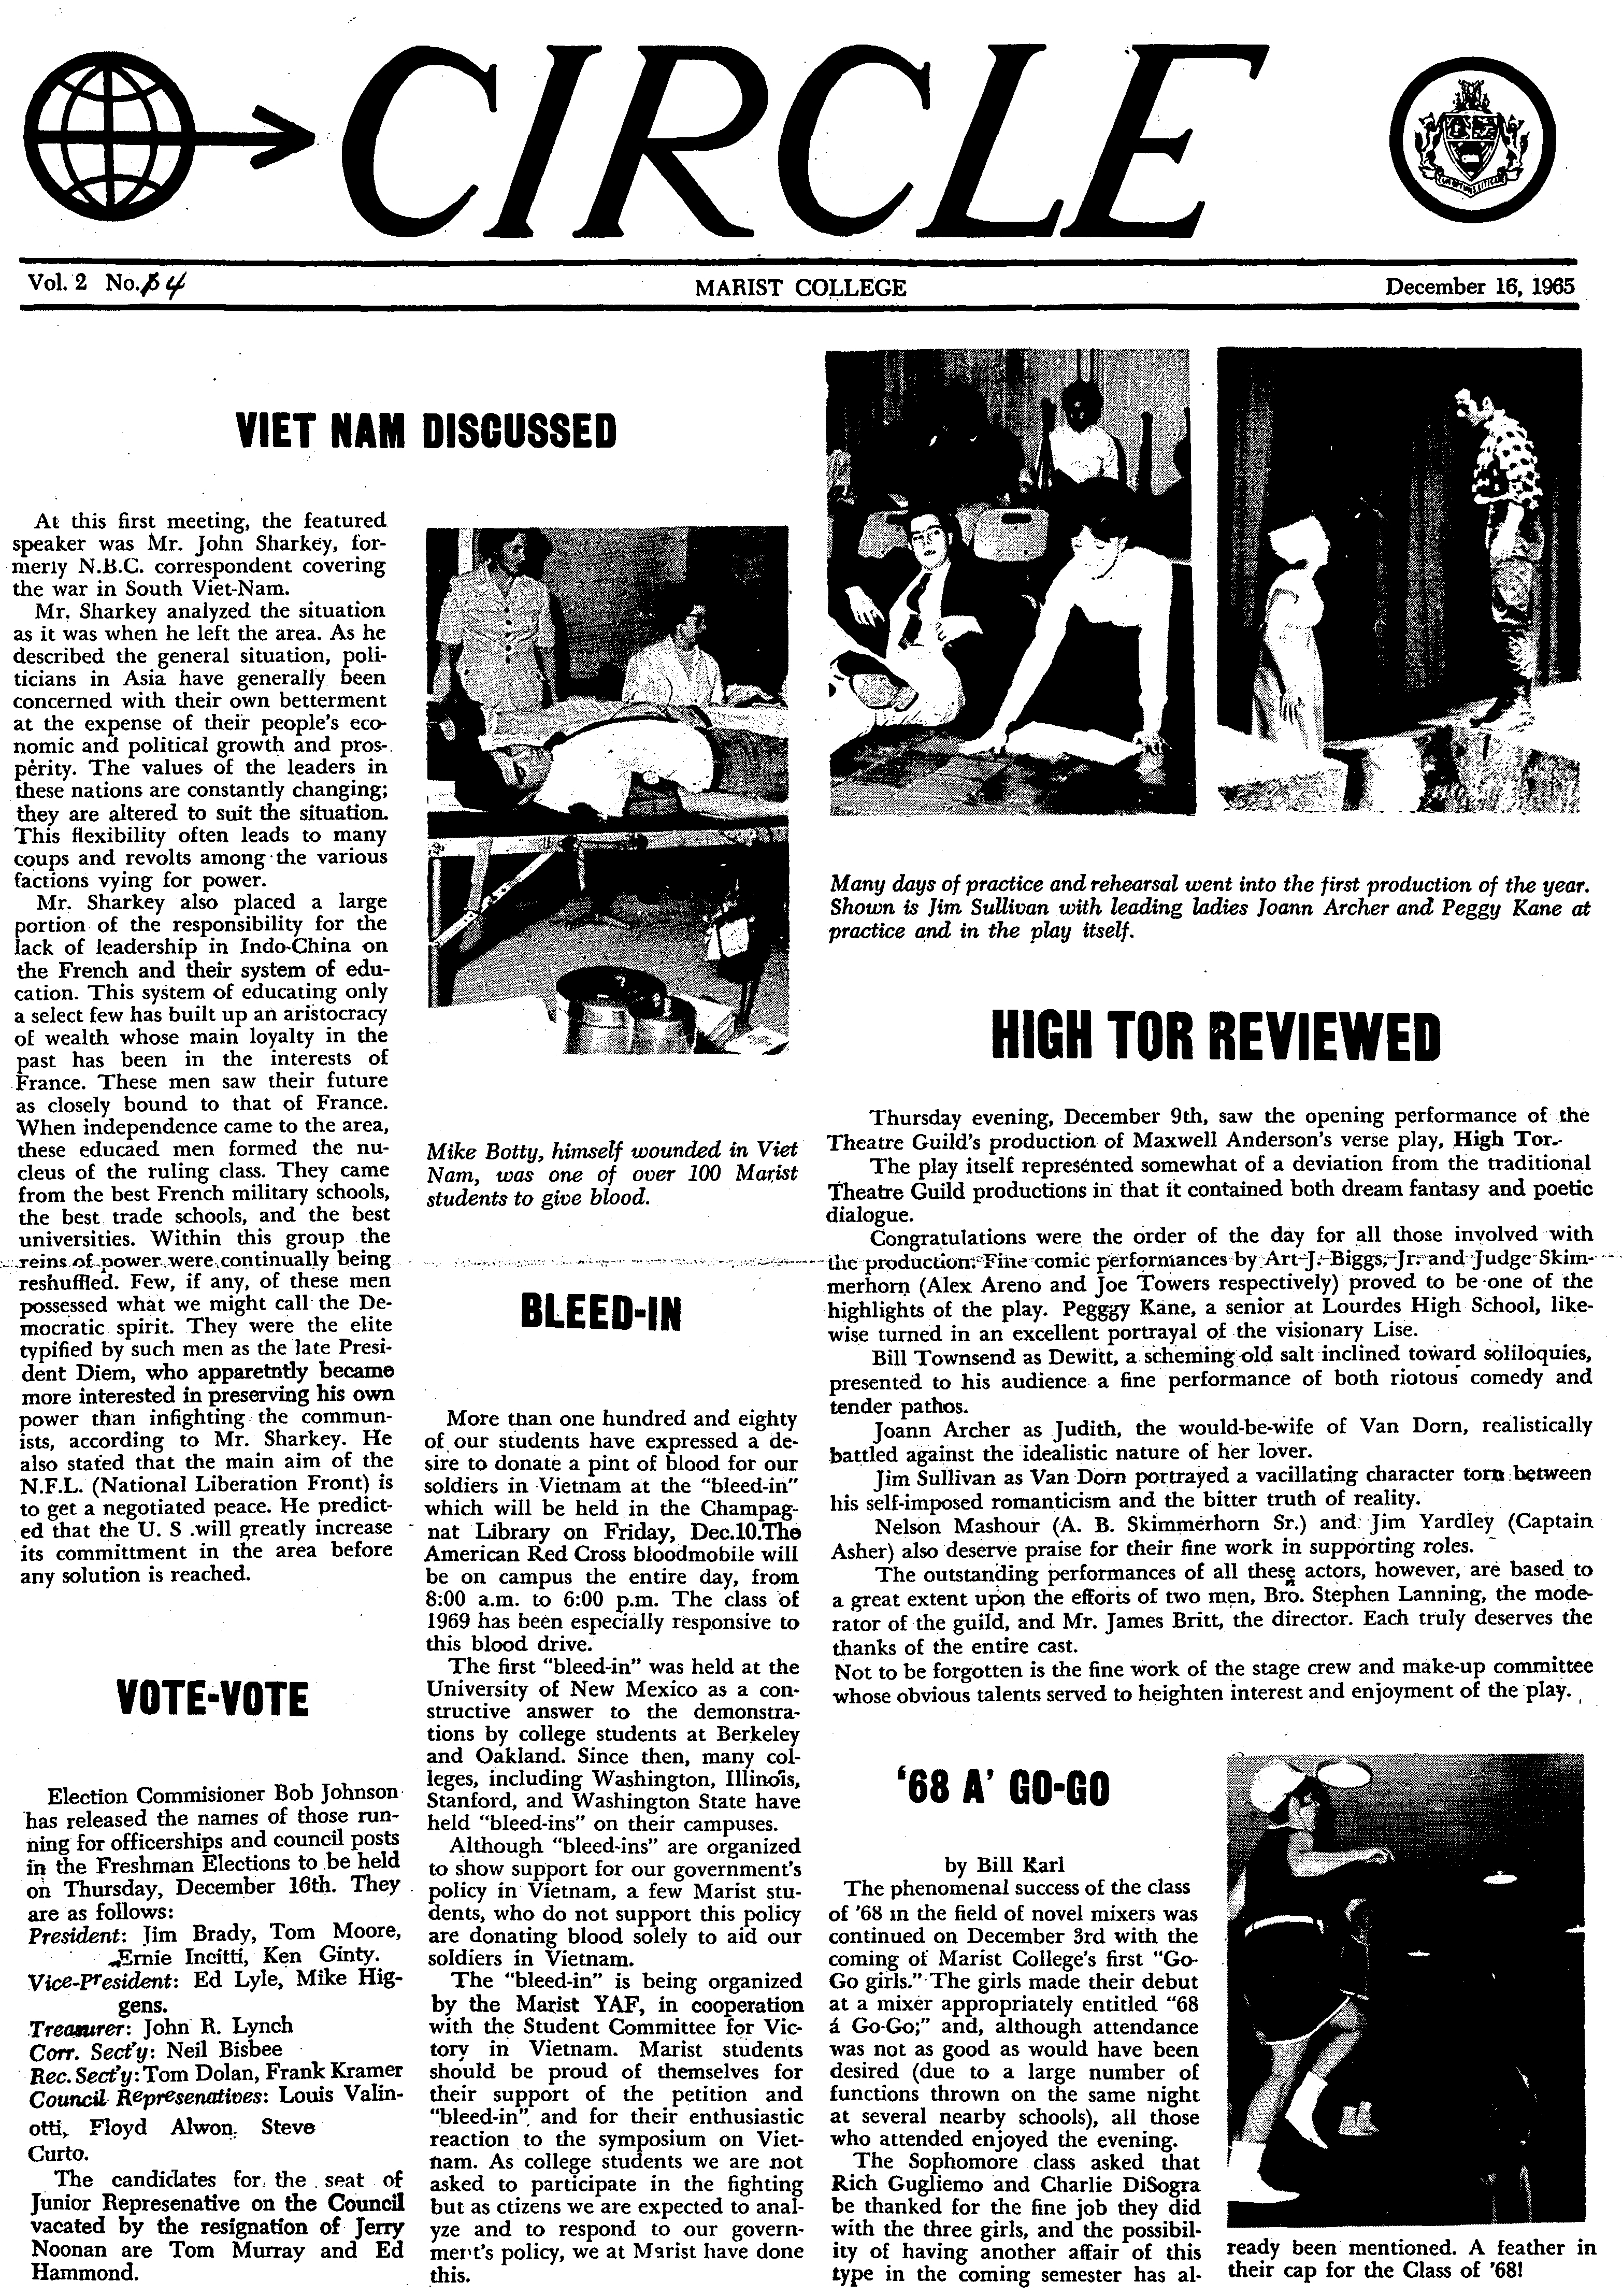 front page of The Circle, Marist Student Newspaper, Volume 2, Number 4 December 16, 1965, with headline stating "Viet Nam discussed."